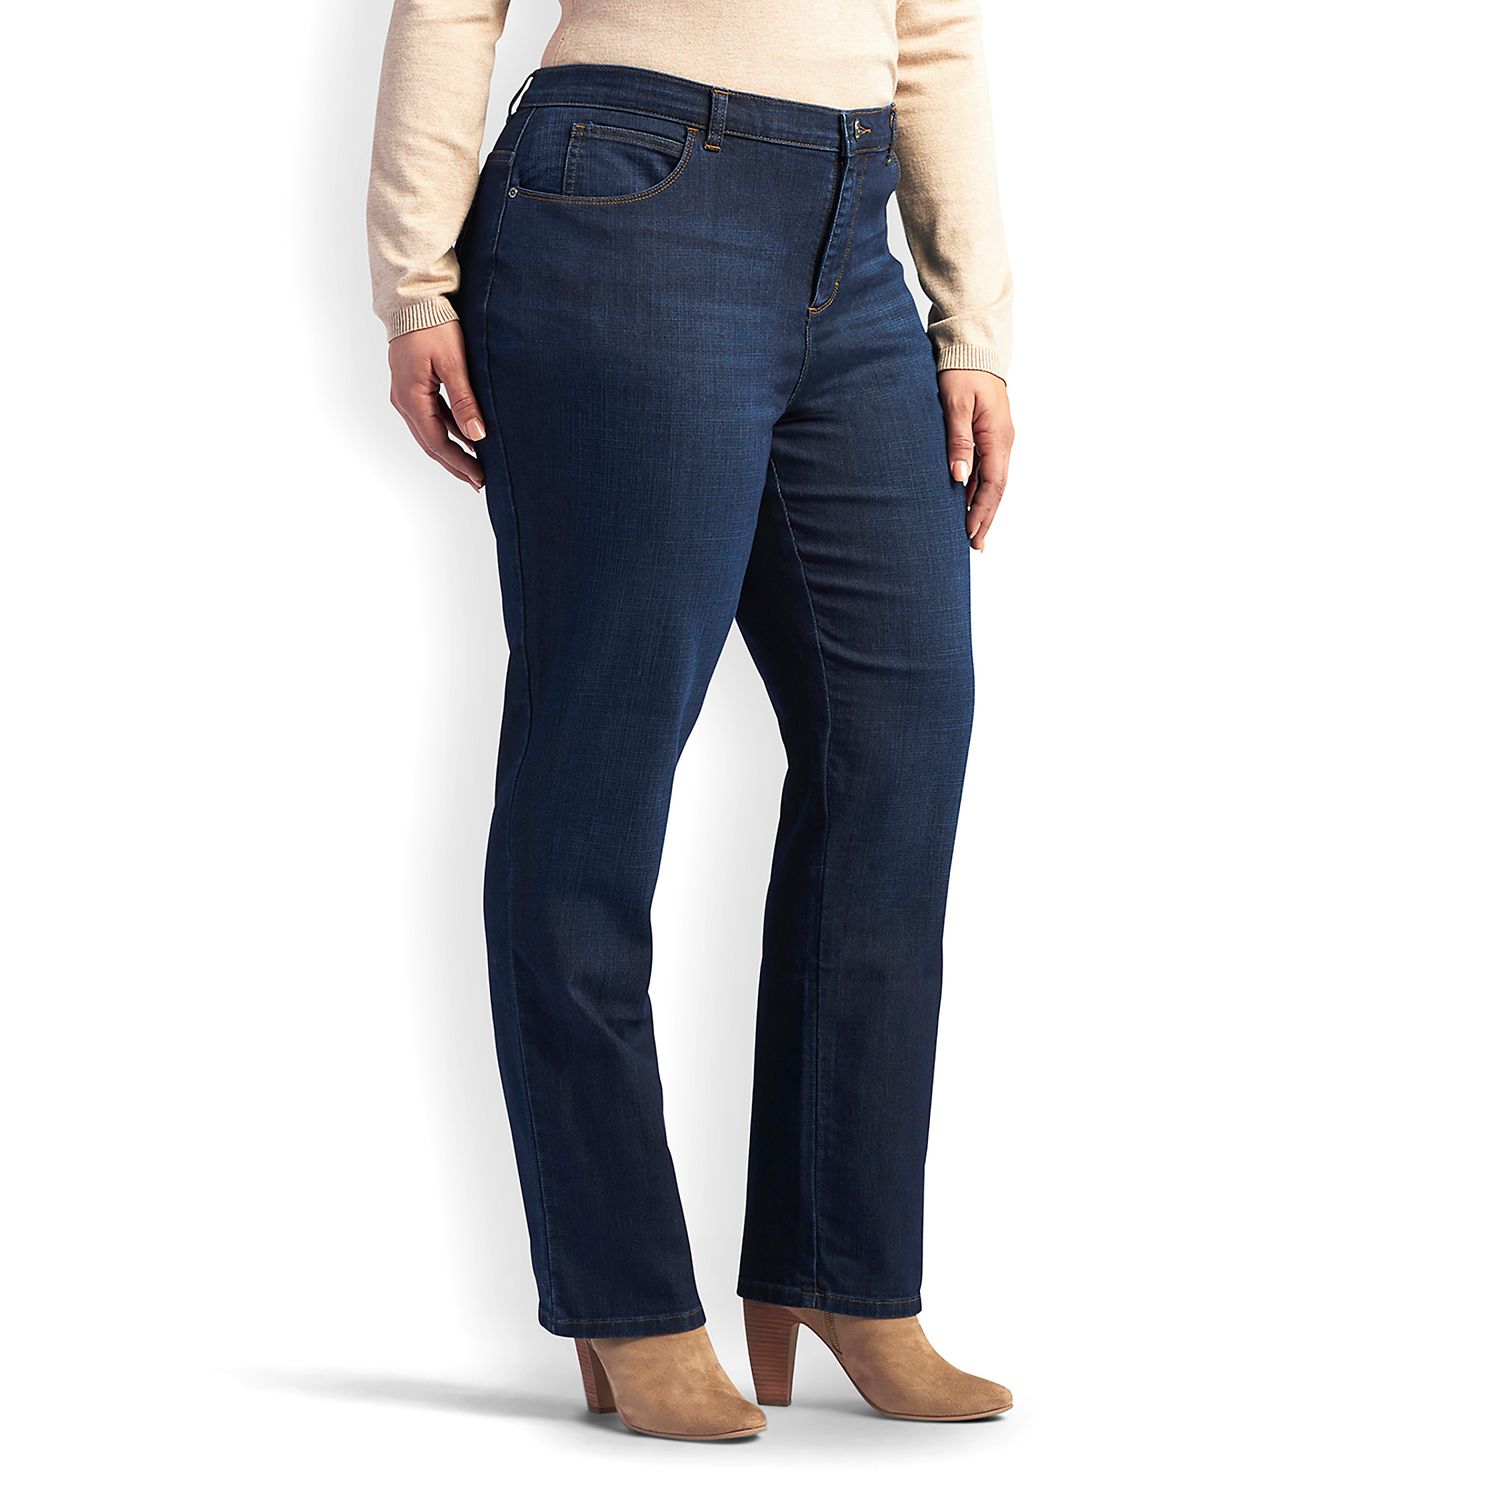 lee riders stretch jeans plus size